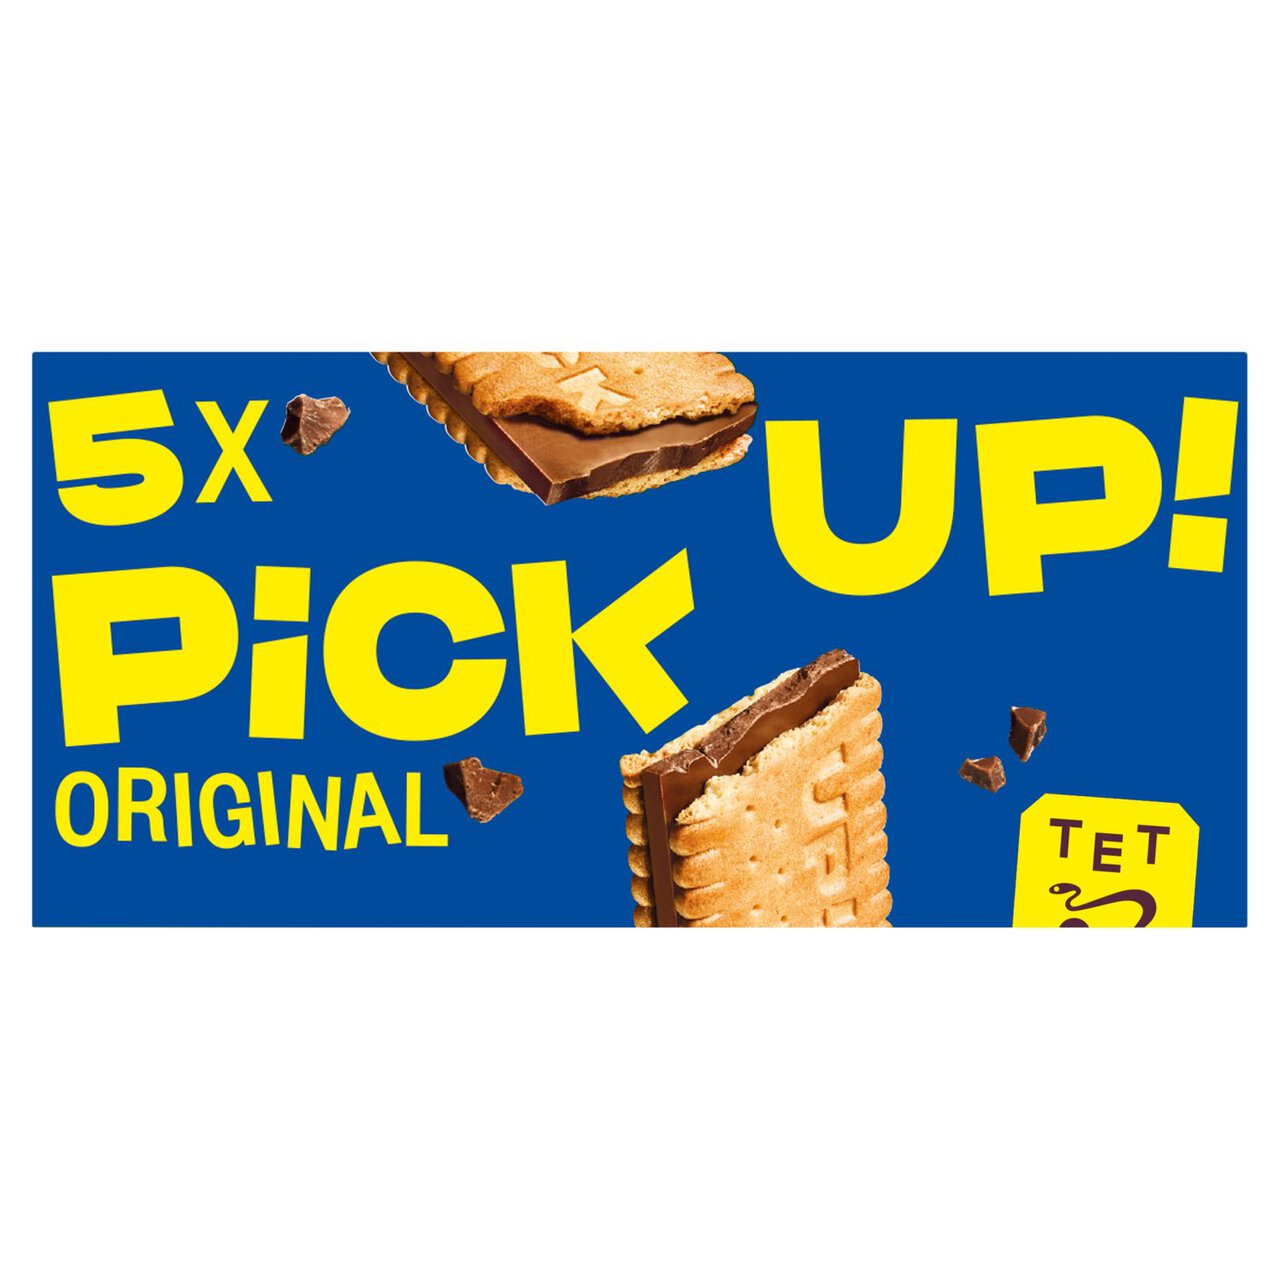 Bahlsen Pick Up! Milk Chocolate Biscuits Bars 5 per pack